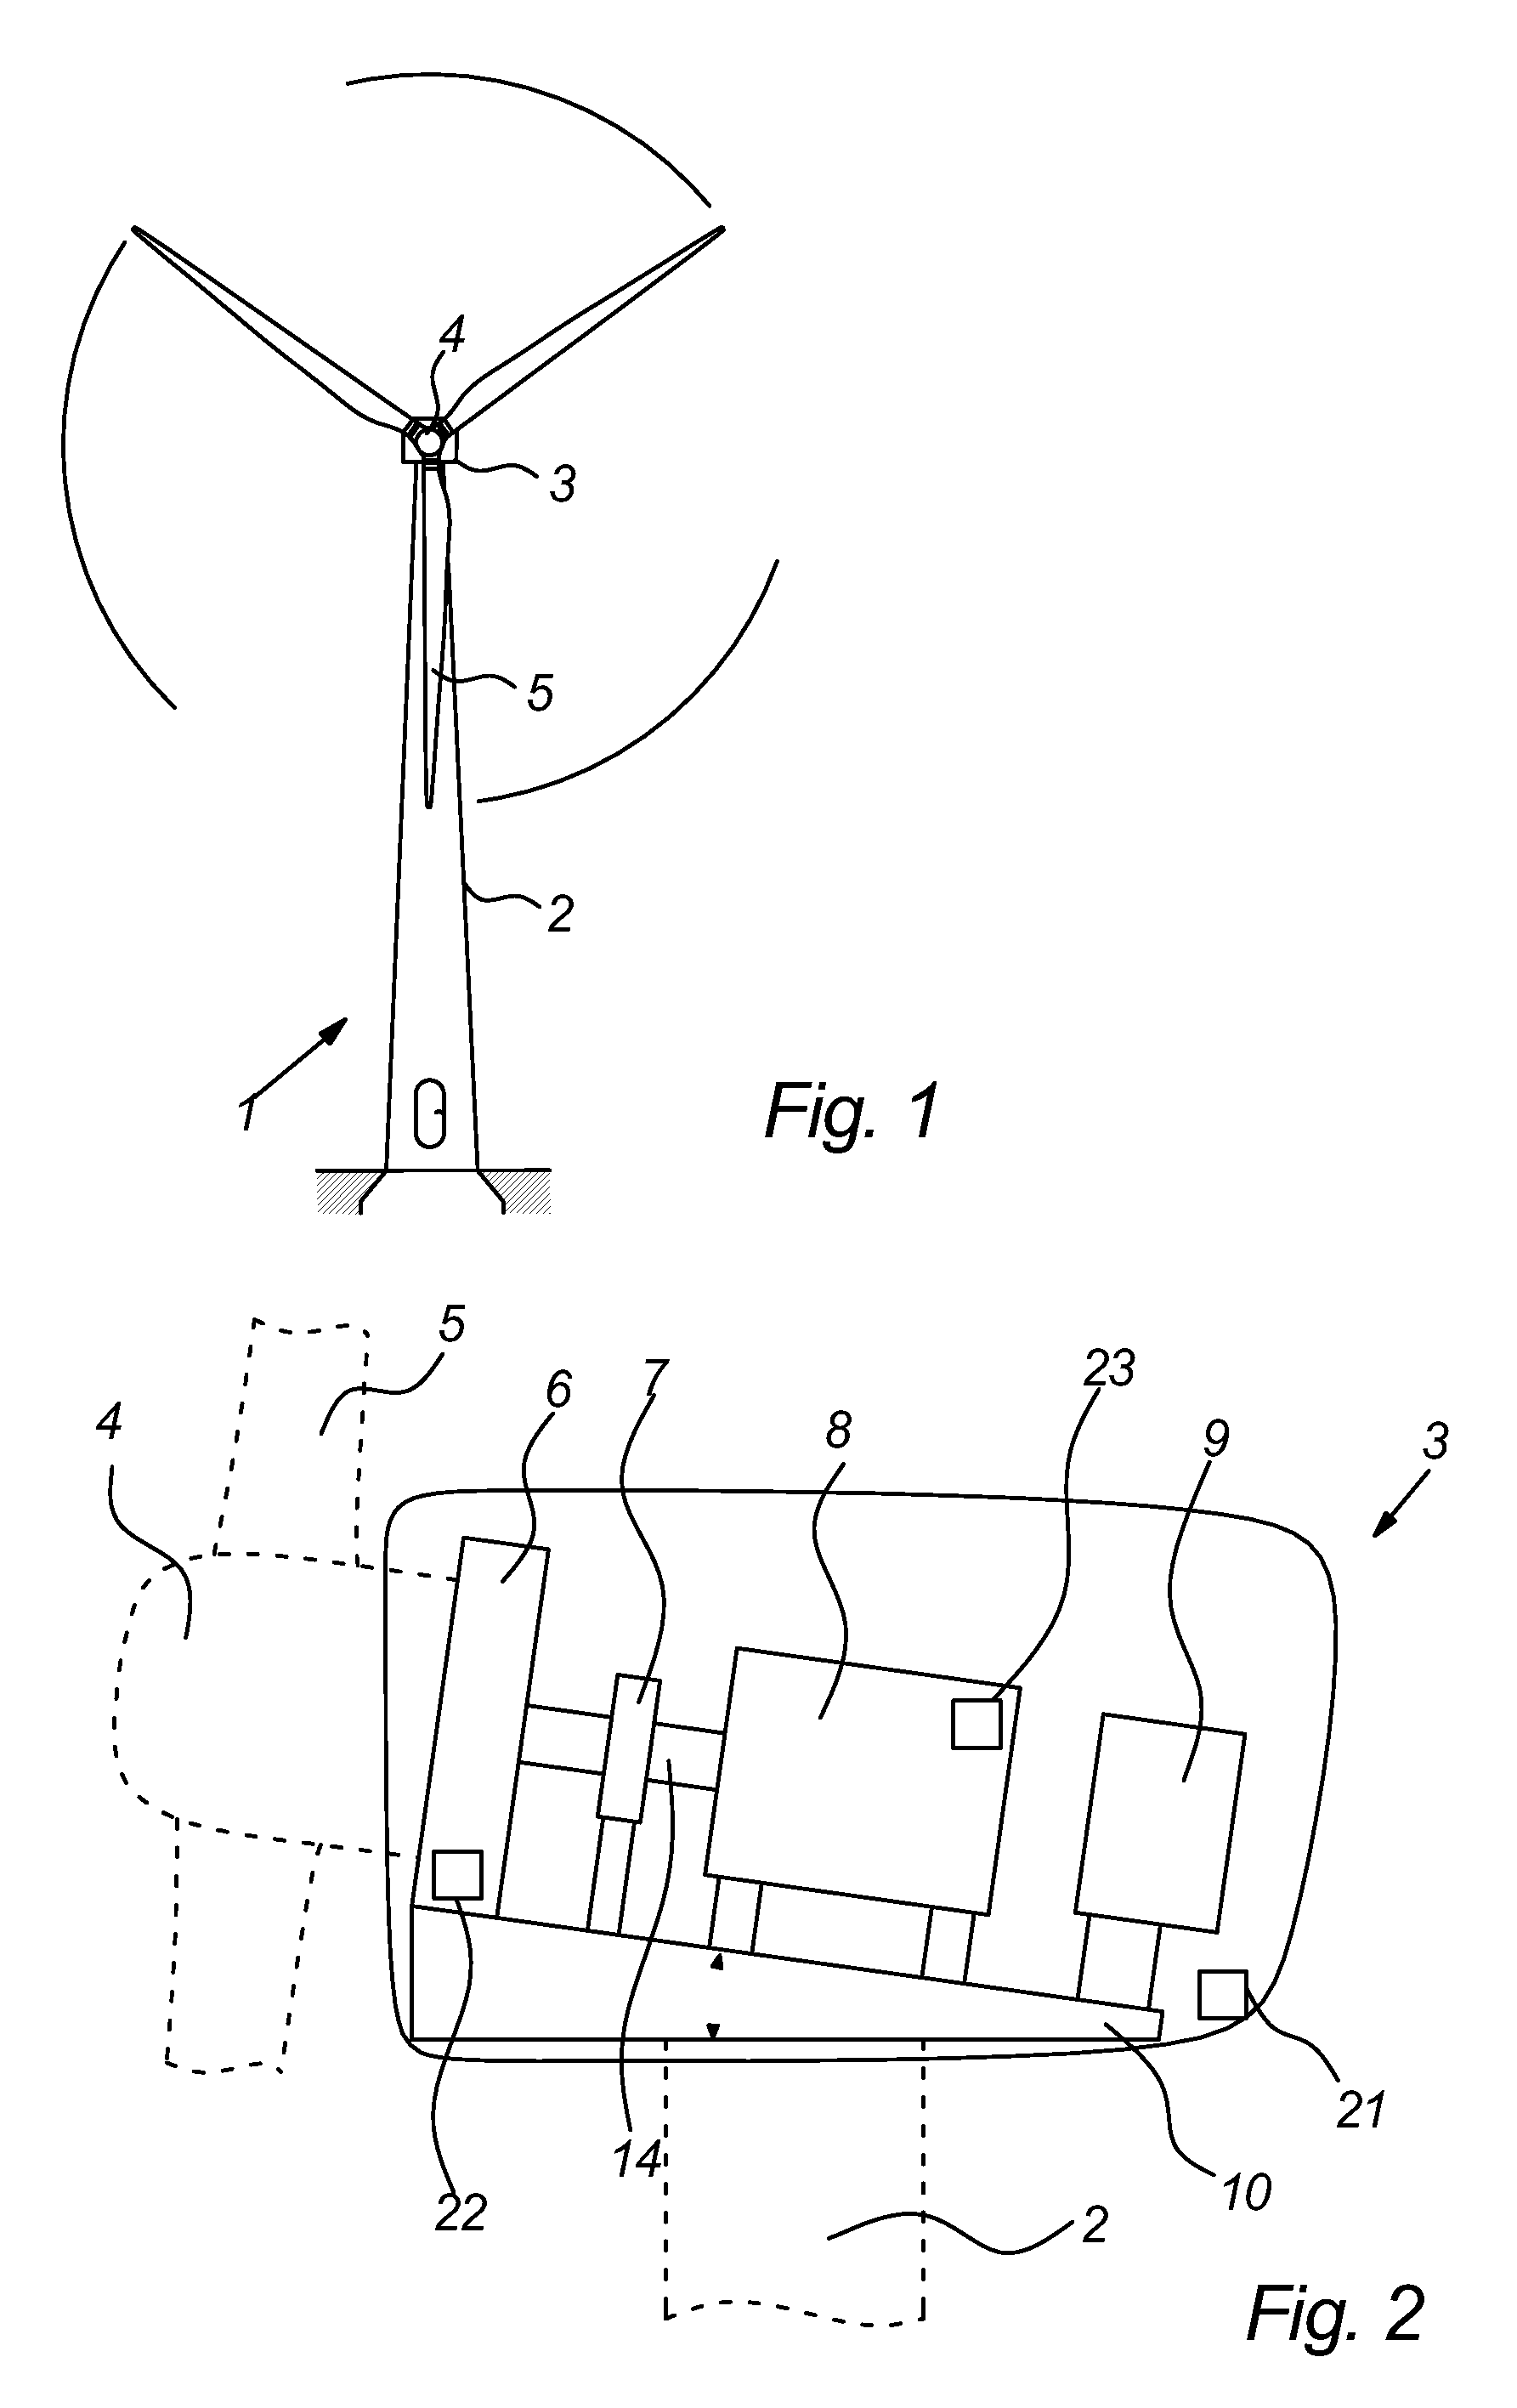 Method And System Of Performing A Functional Test Of At Least One Embedded Sub-Element Of A Wind Turbine